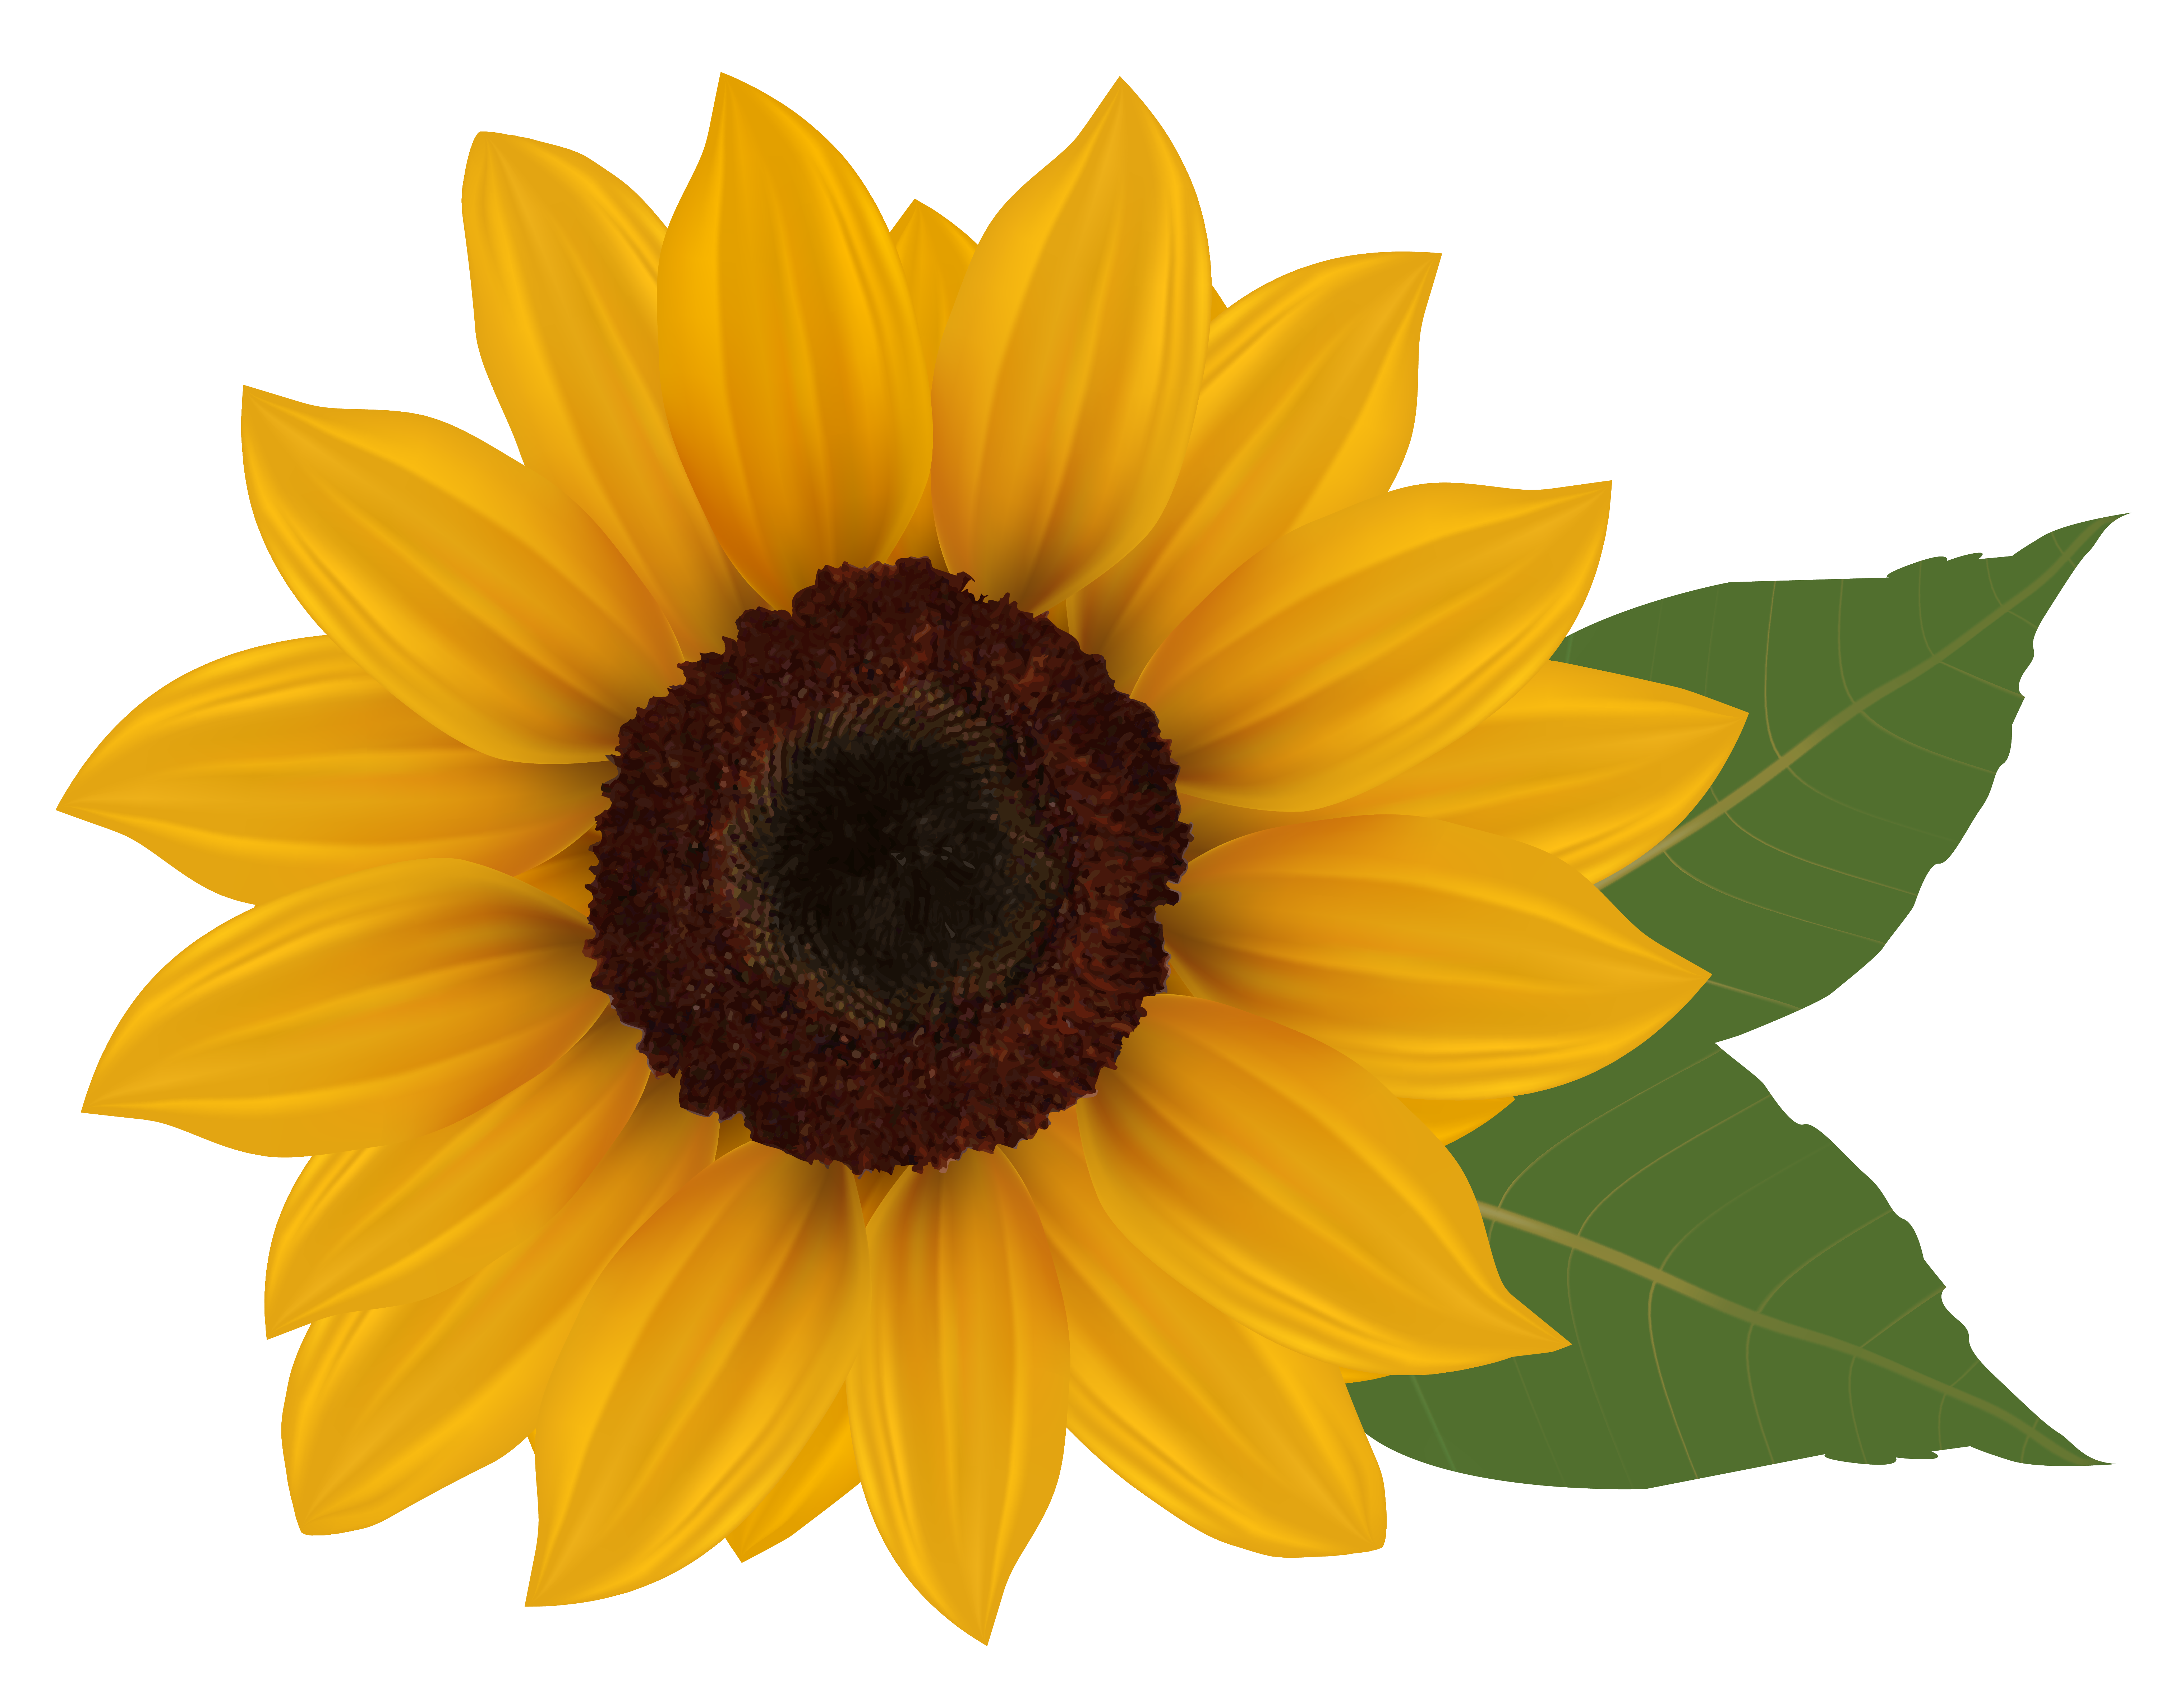 Sunflower PNG Clipart Picture